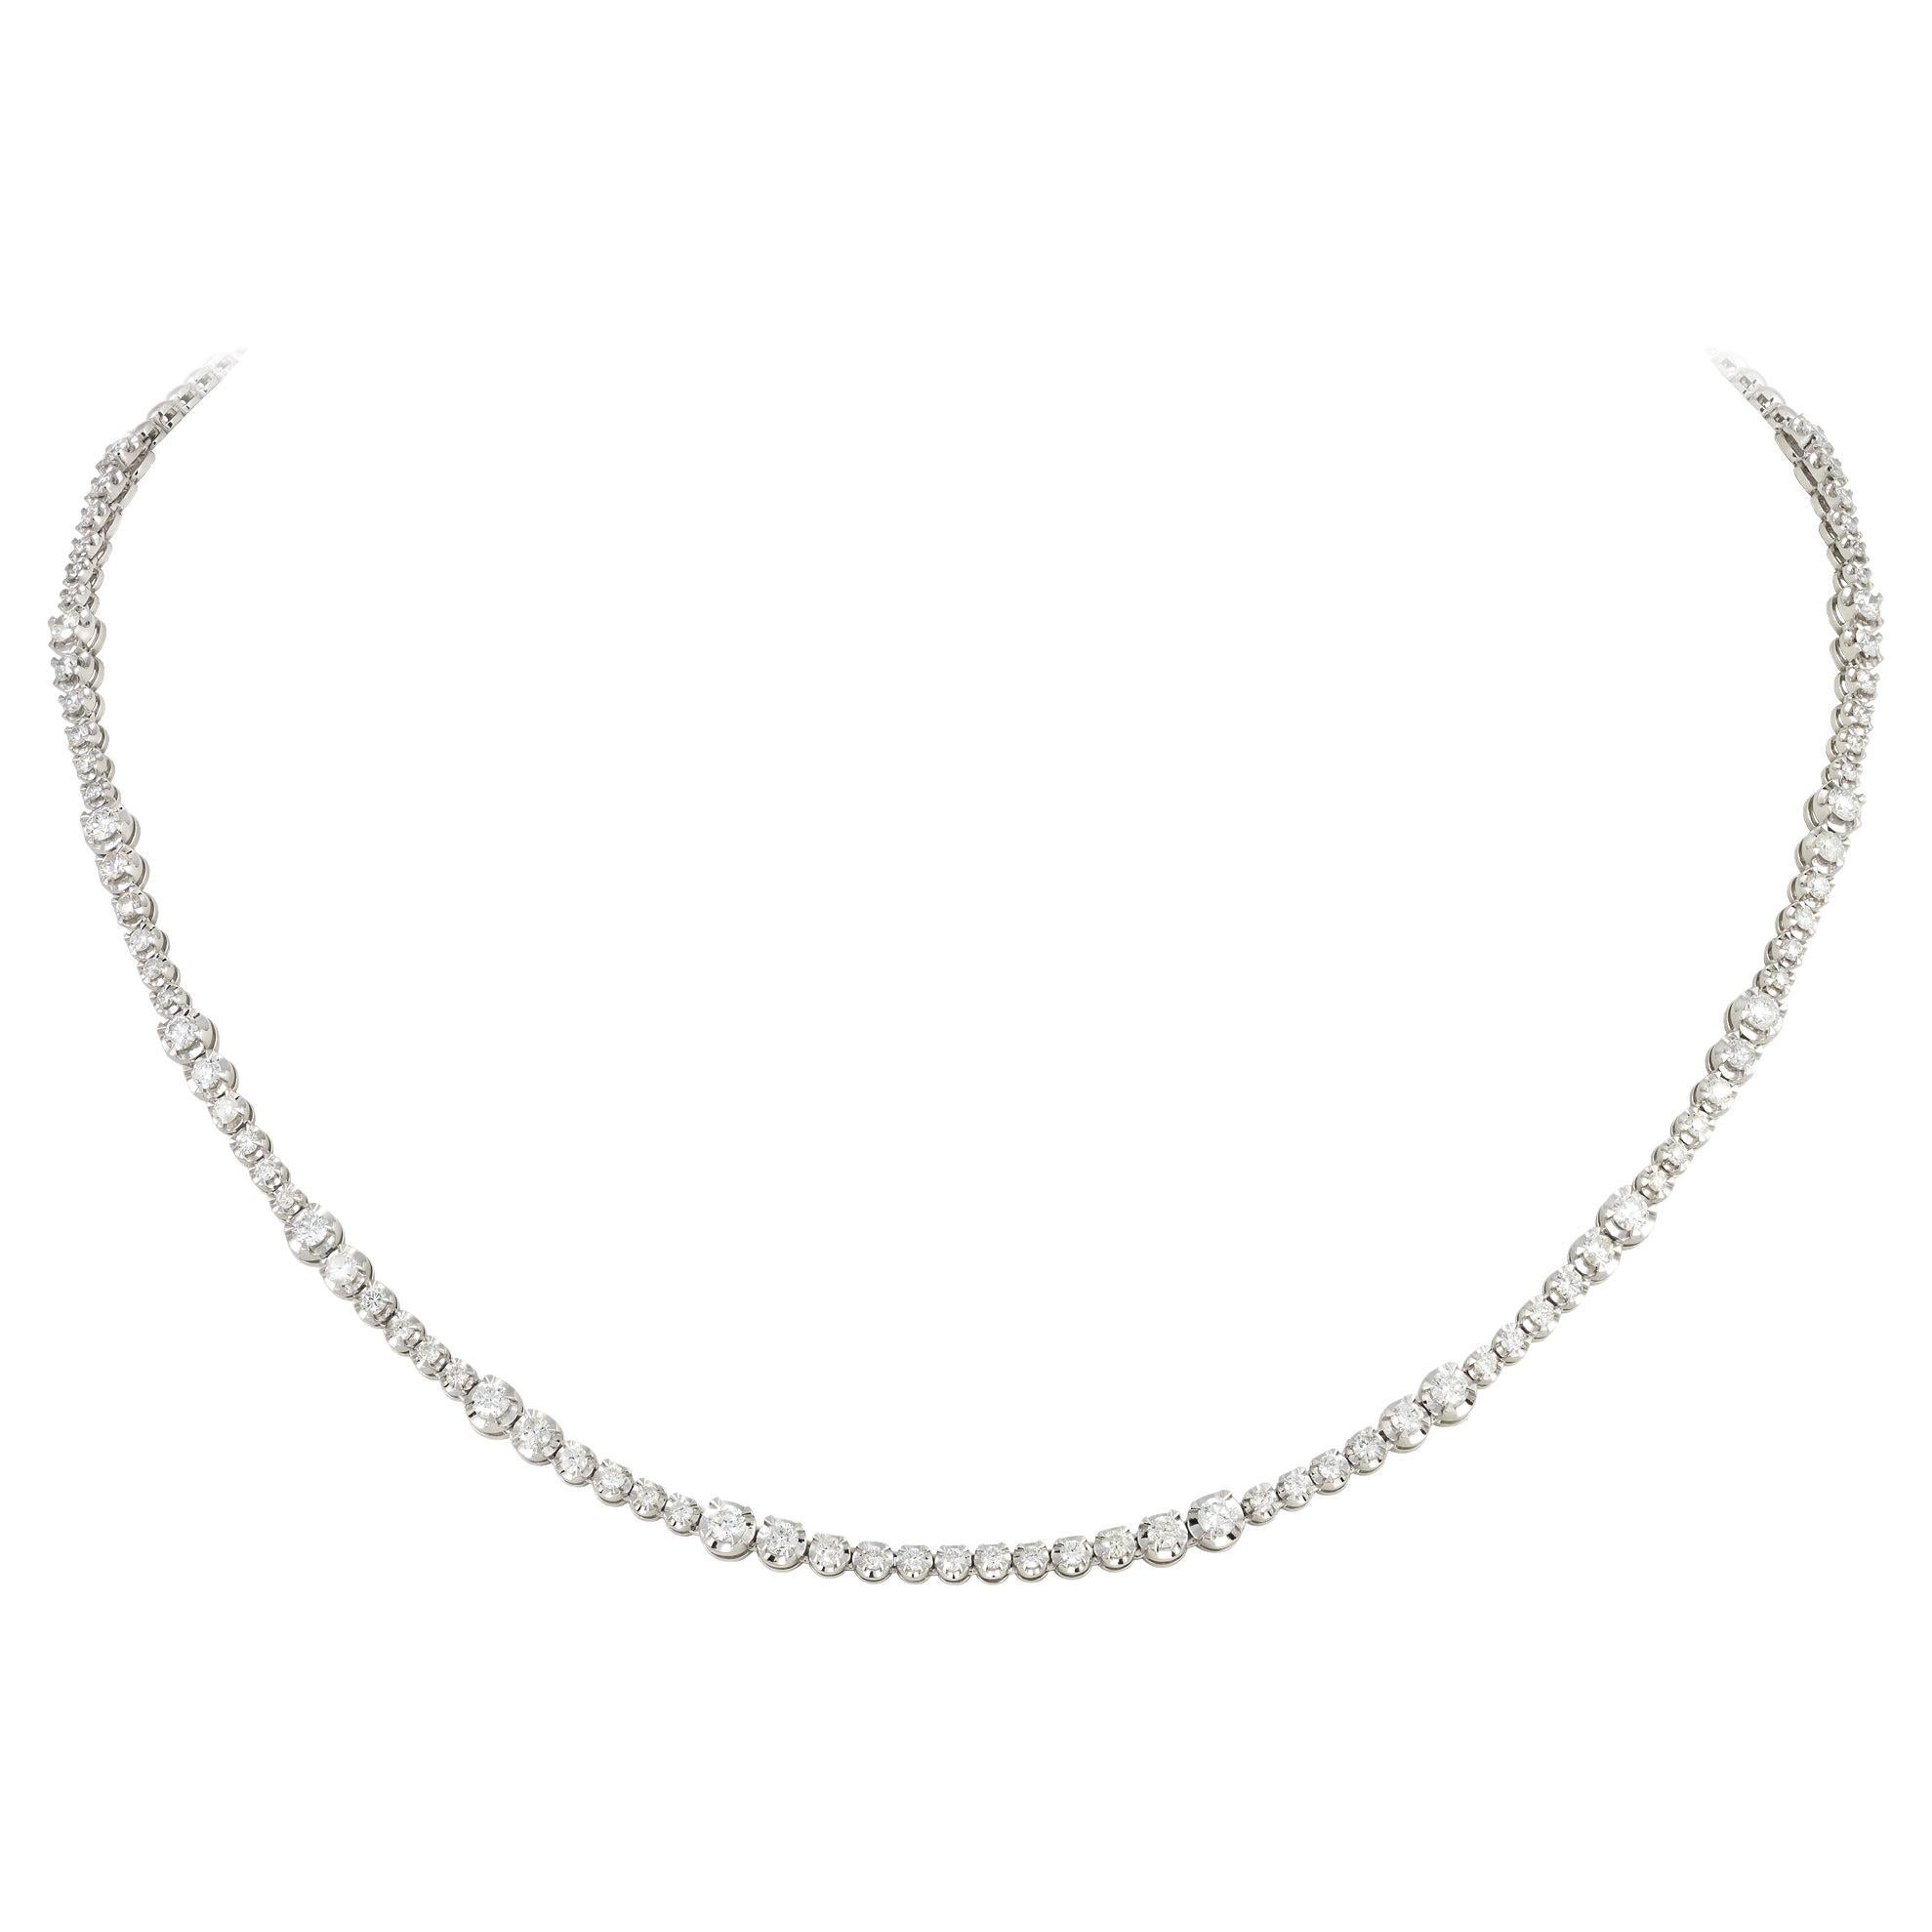 Evening White Gold 18K Necklace Diamond for Her For Sale